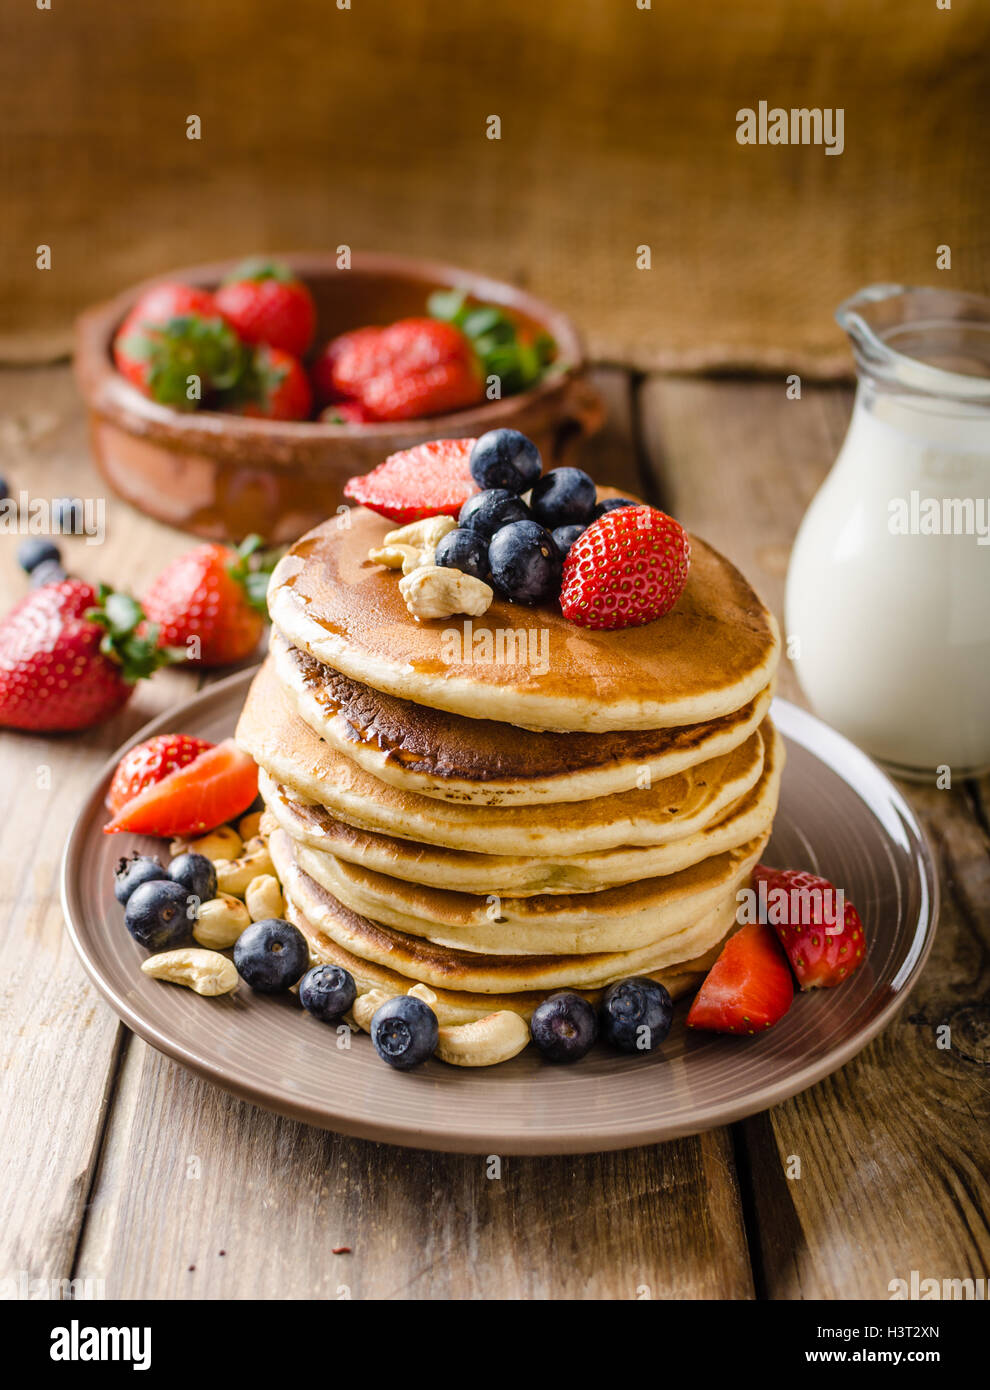 Original american pancakes with berries, roasted nuts and milk behind,  rustic style photo, place for advertisment Stock Photo - Alamy